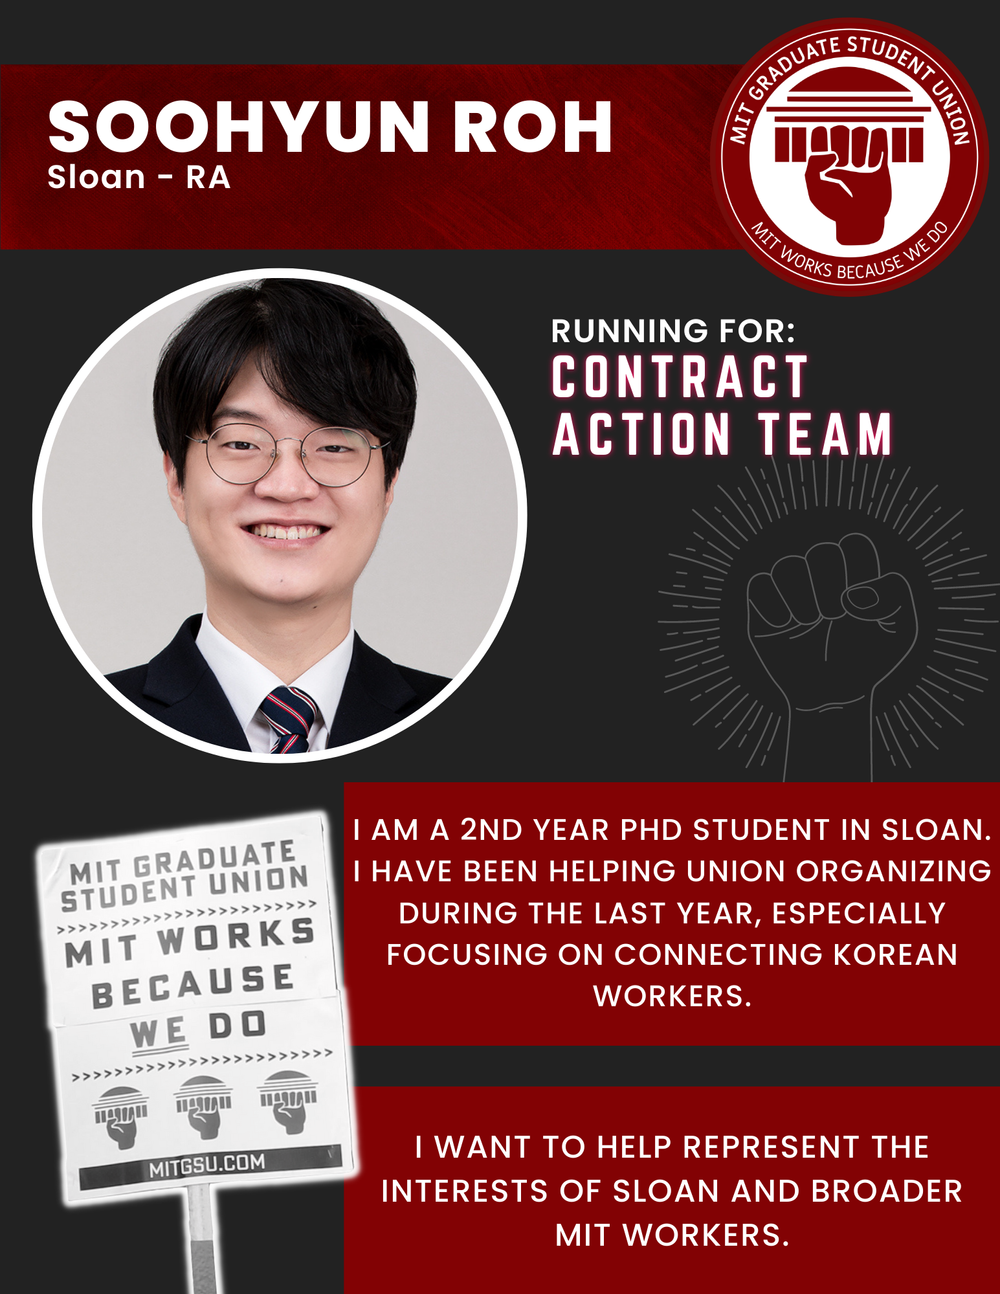  SOOHYUN ROH Sloan - RA   RUNNING FOR: Contract Action Team  I AM A 2ND YEAR PHD STUDENT IN SLOAN.  I HAVE BEEN HELPING UNION ORGANIZING DURING THE LAST YEAR, ESPECIALLY FOCUSING ON CONNECTING KOREAN WORKERS.  I WANT TO HELP REPRESENT THE INTERESTS O